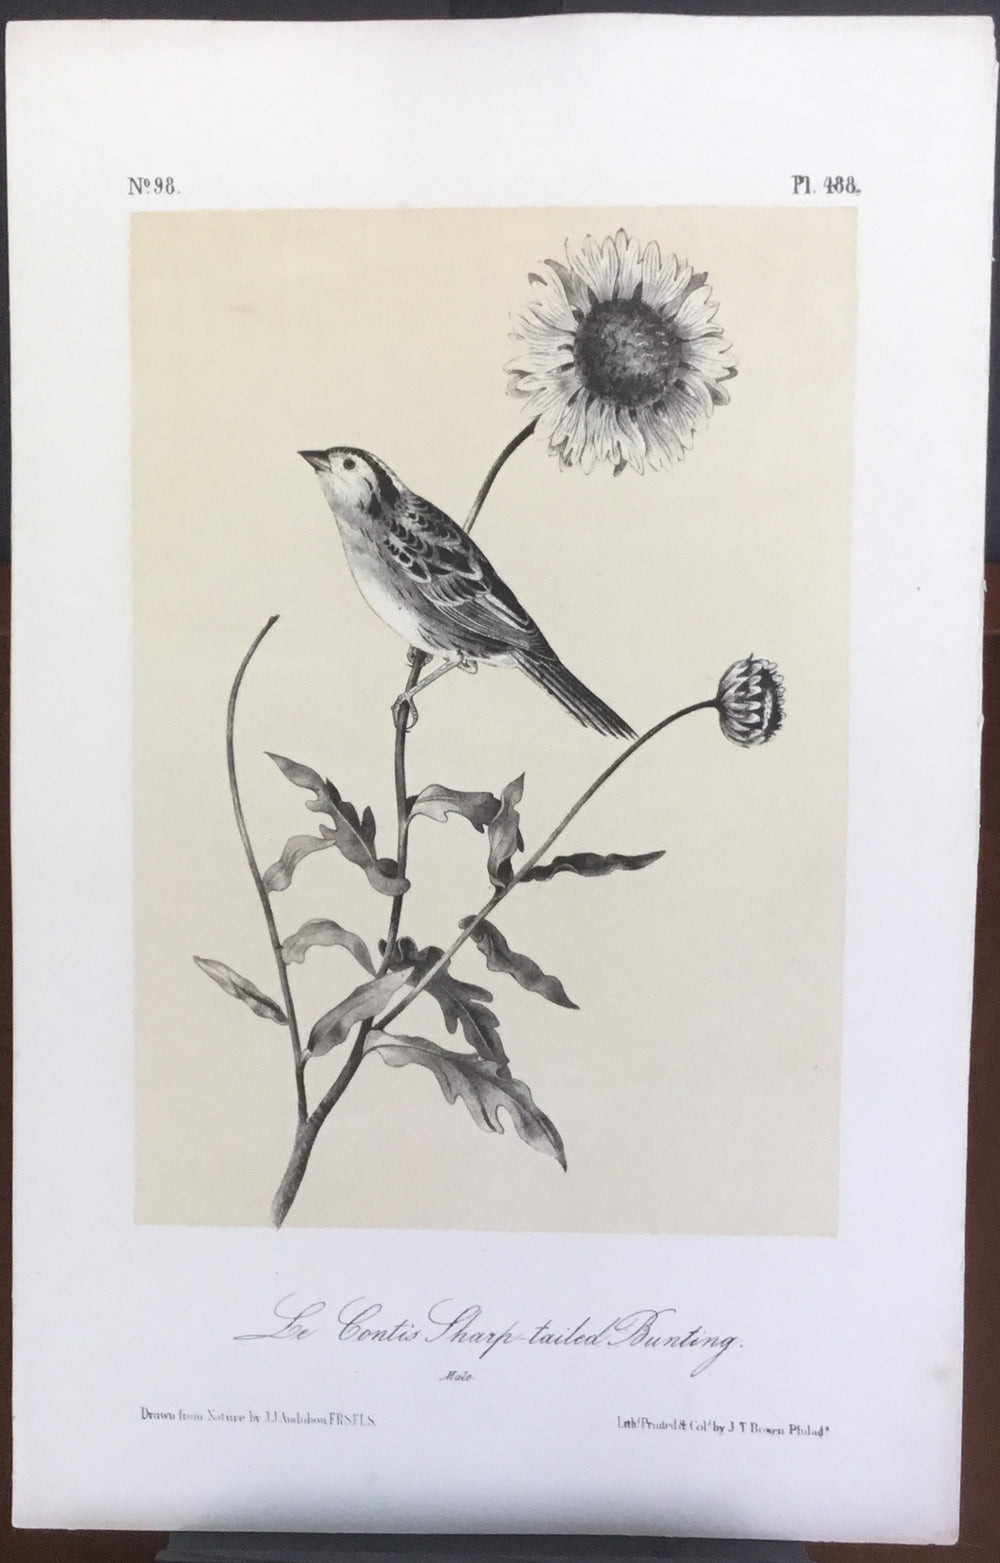 Audubon Octavo Le Contis Sharp-tailed Bunting, plate 488, uncolored test sheet, 7 x 11